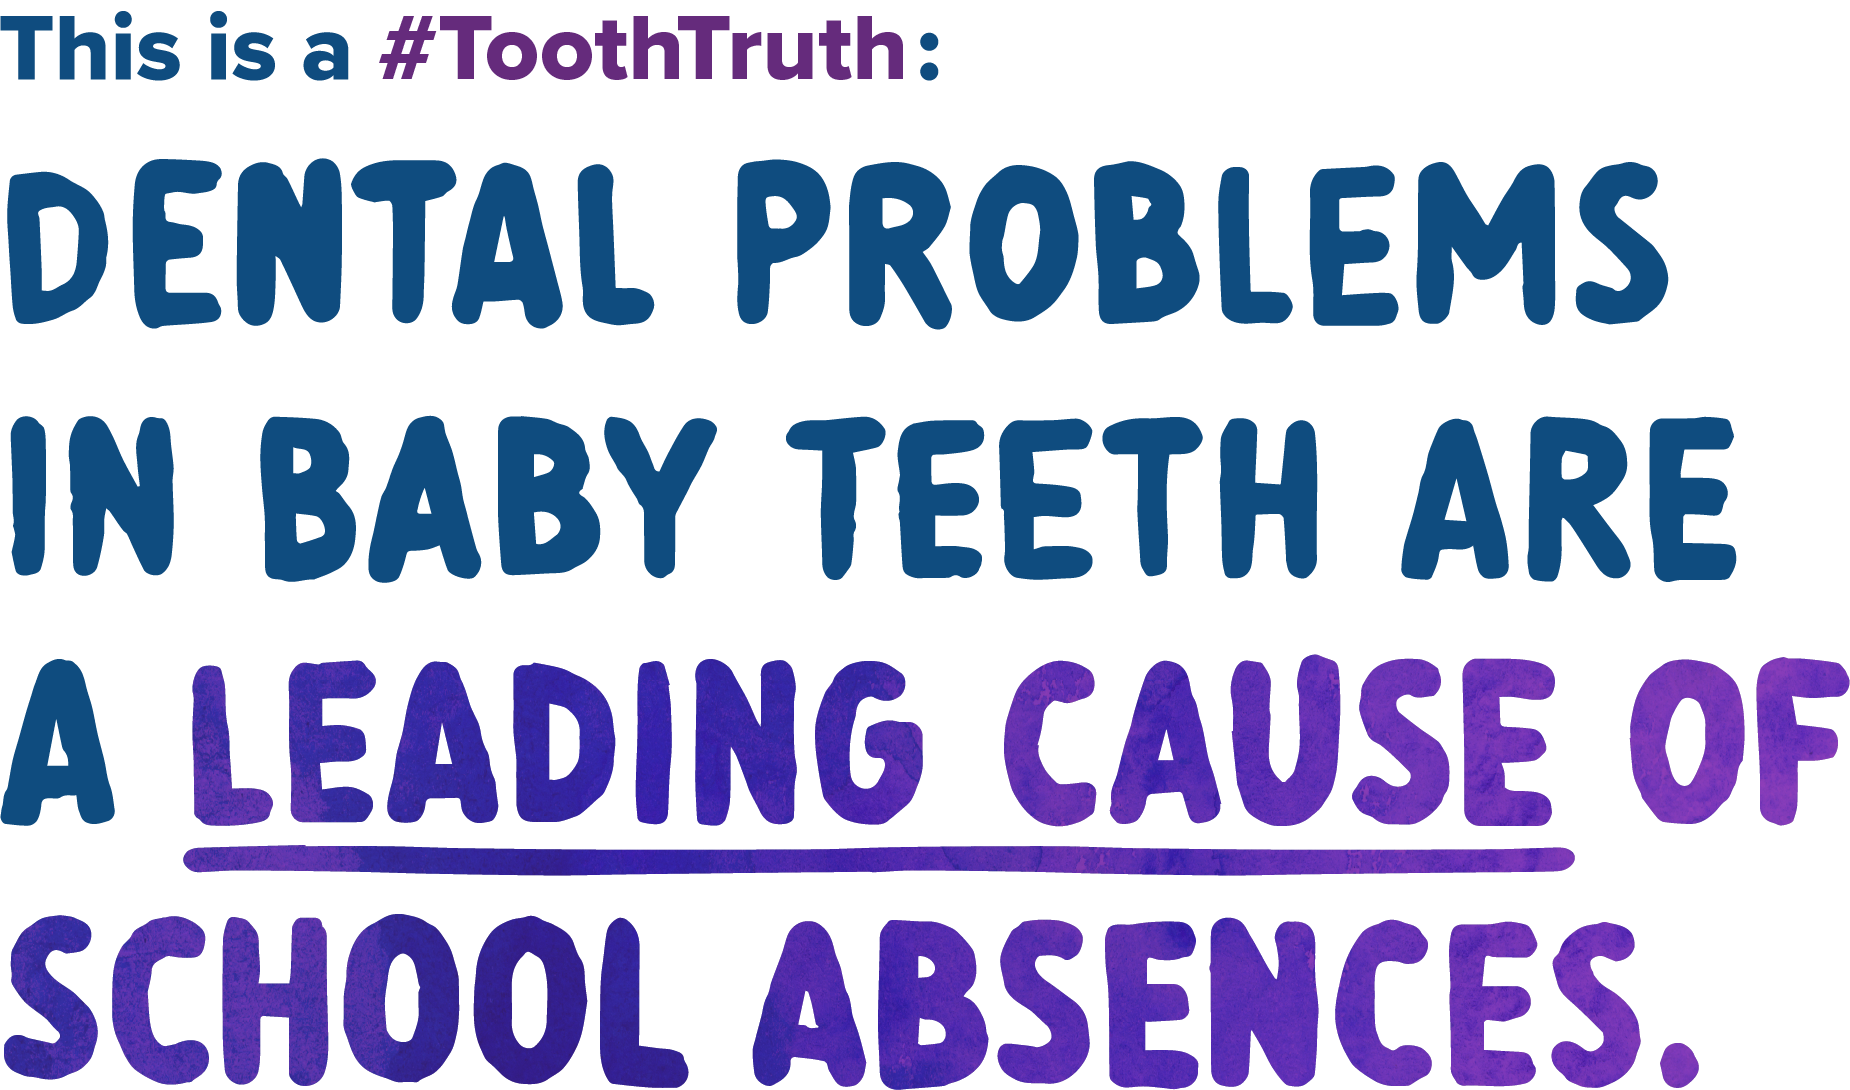 Dental problems in baby teeth are a leading cause of school absences